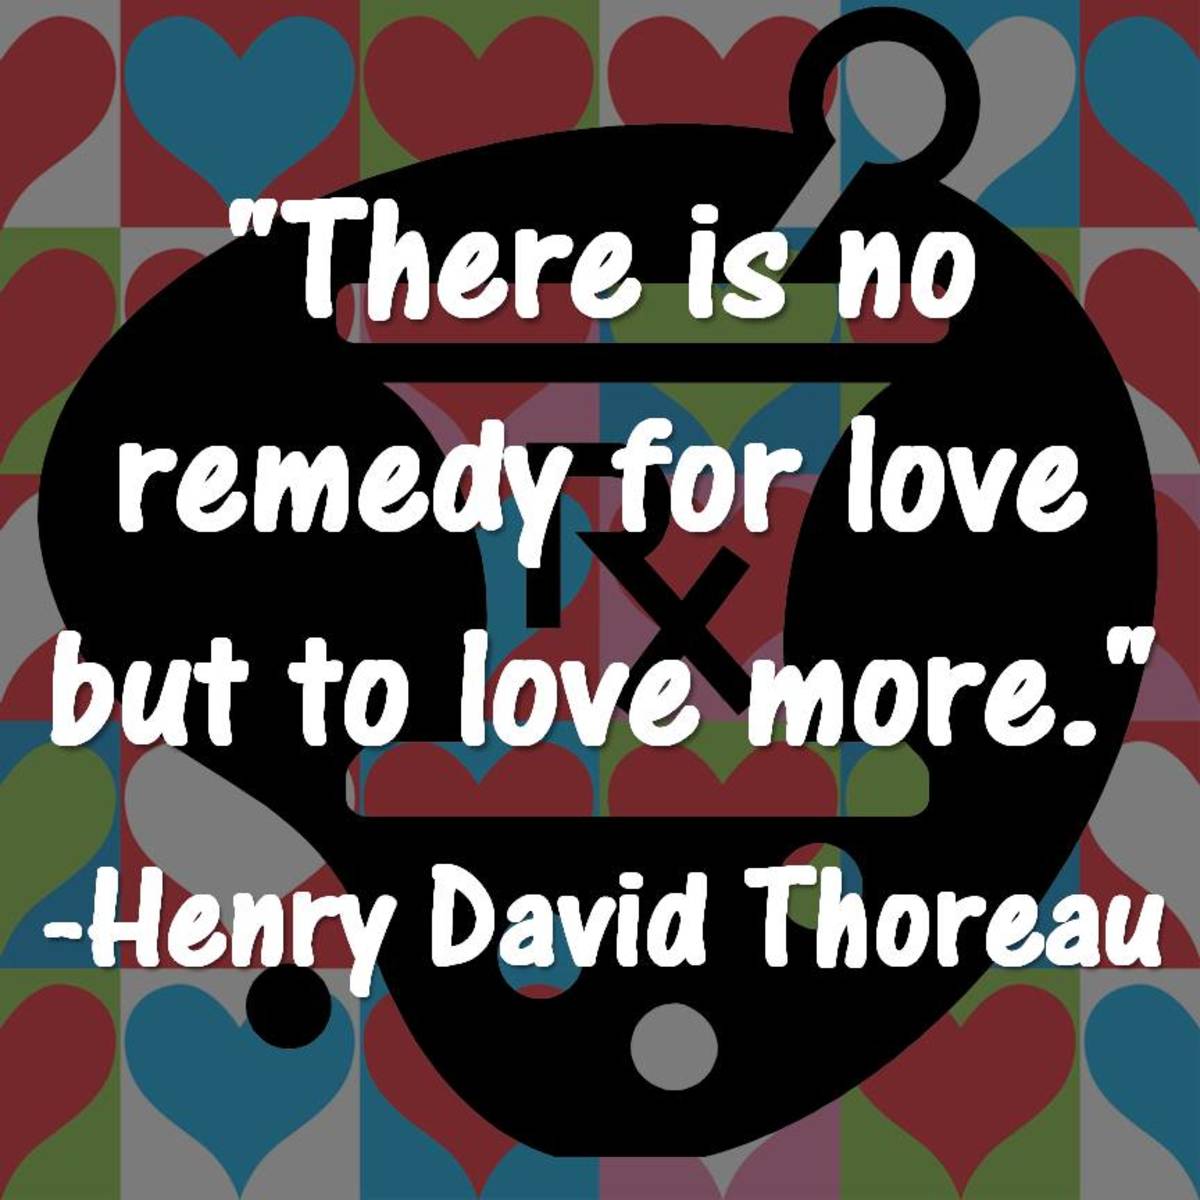 "There is no remedy for love but to love more." -Henry David Thoreau